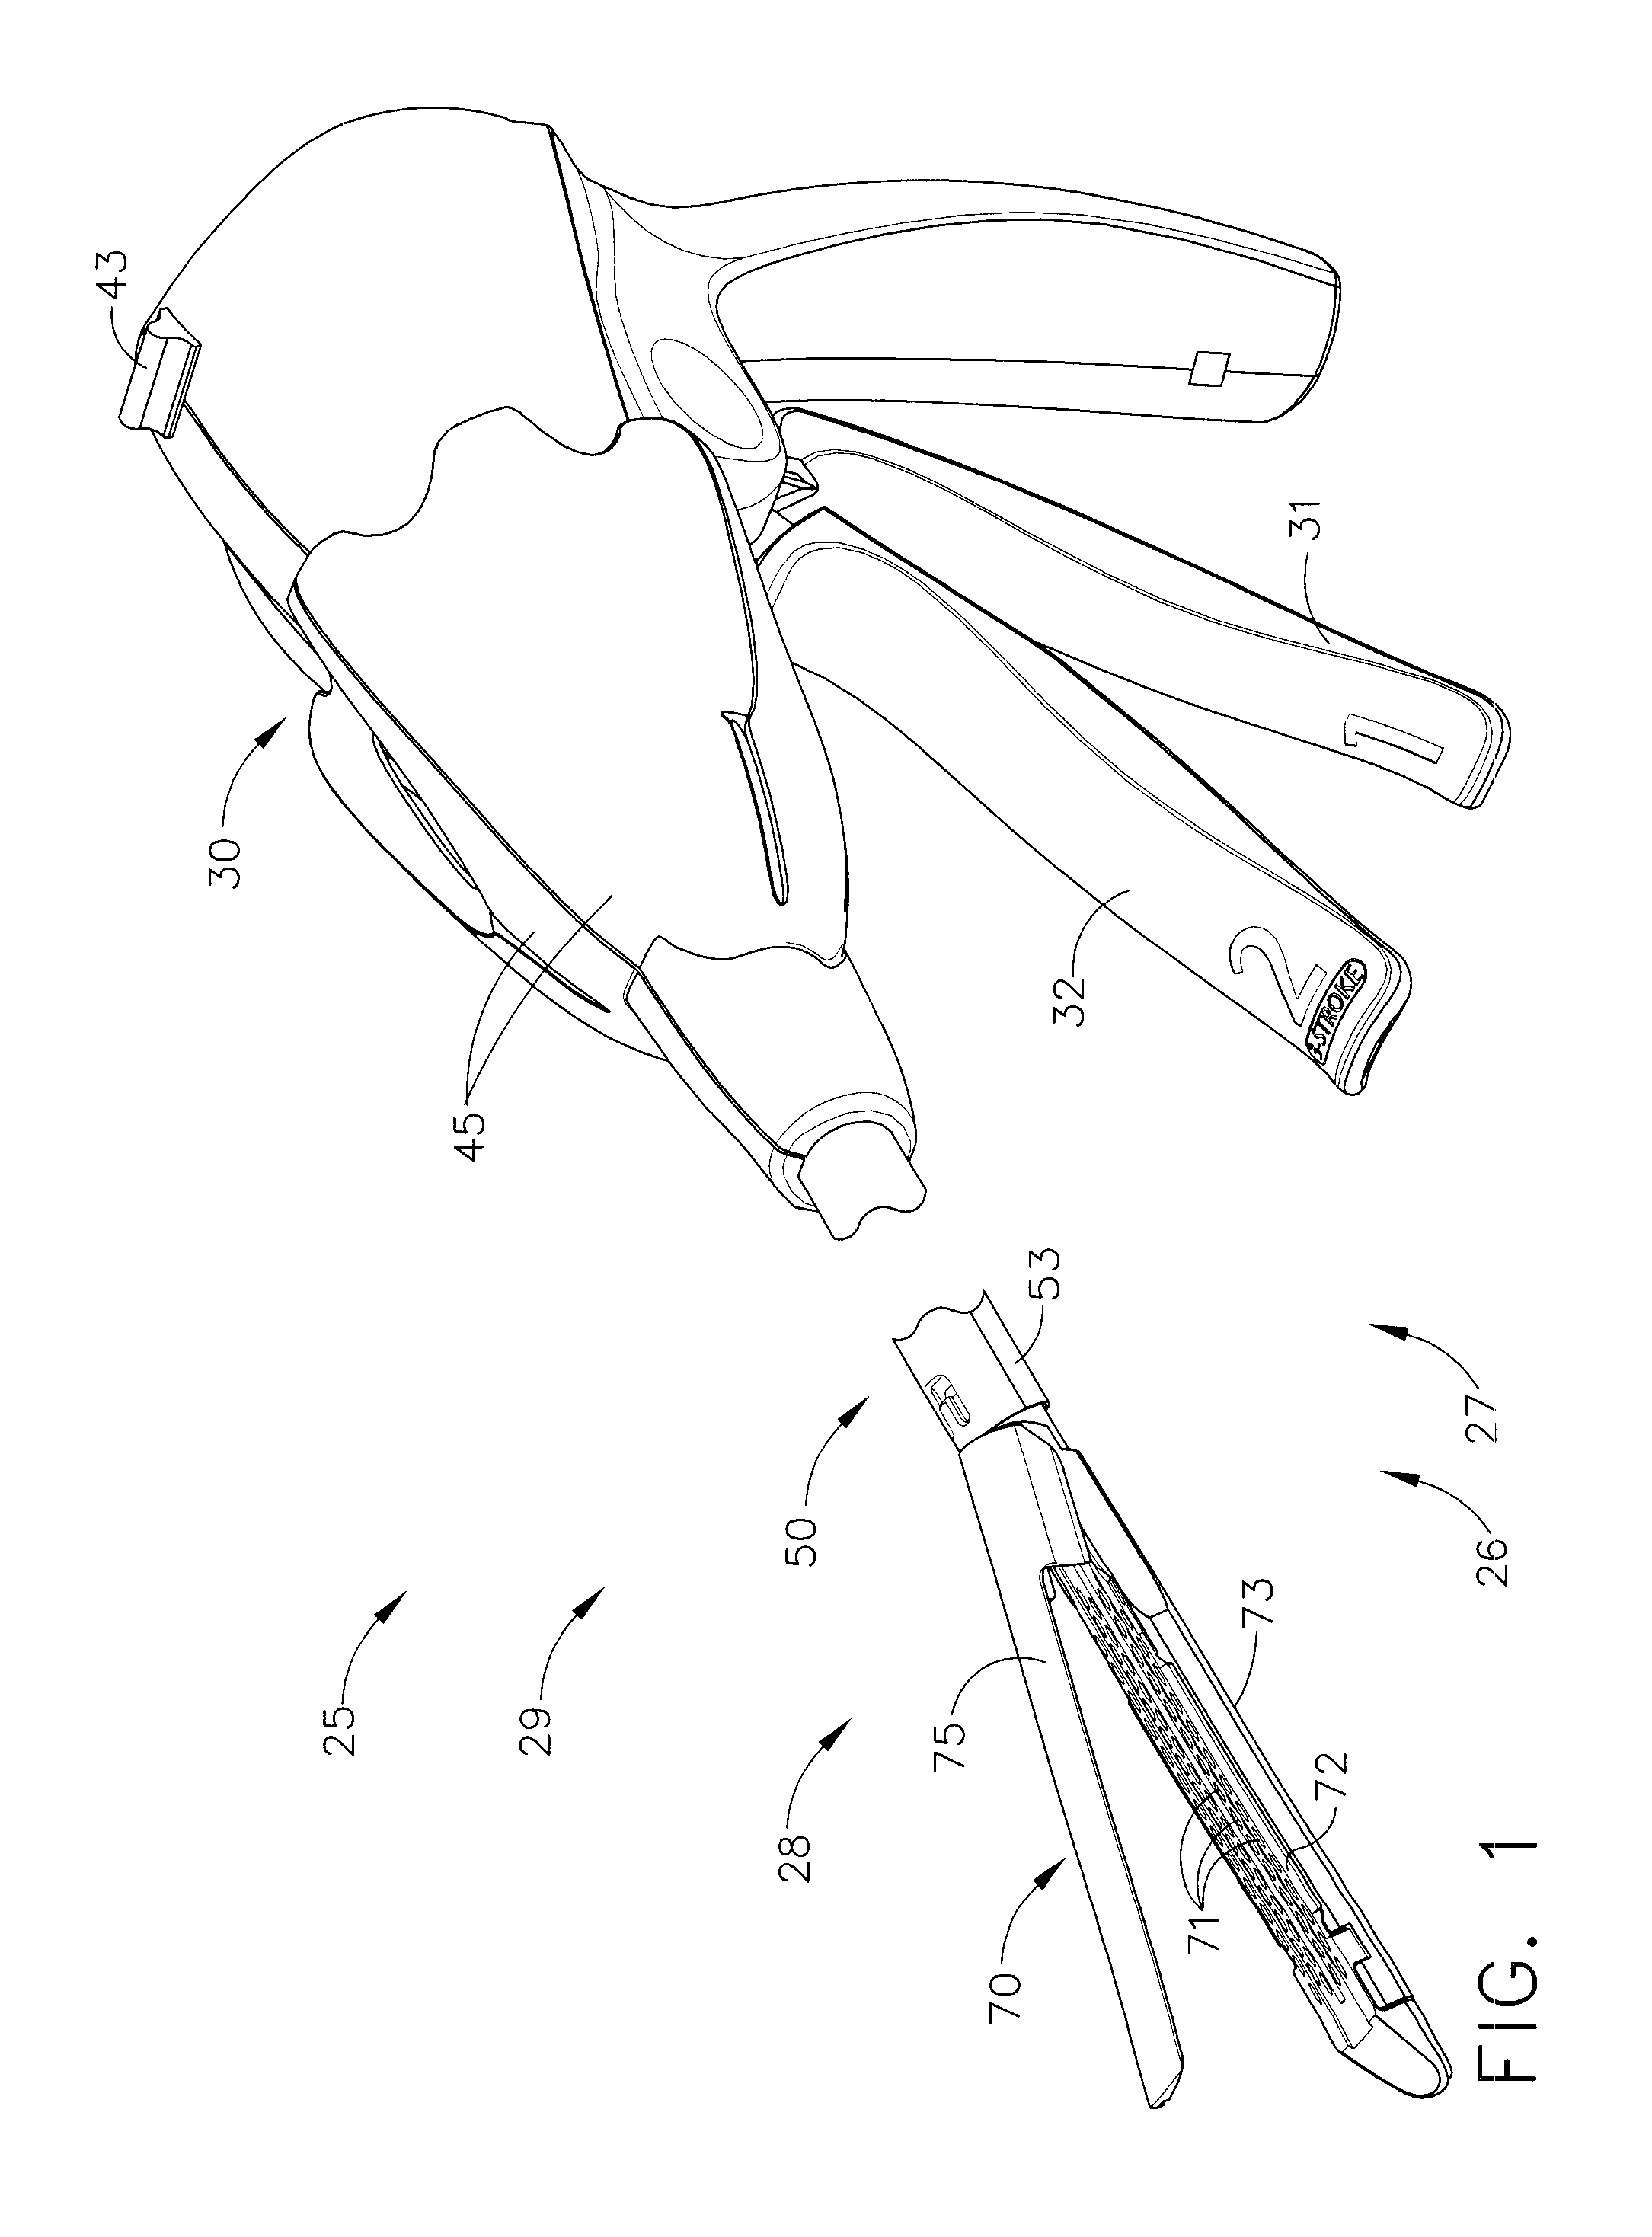 Disposable cartridge with adhesive for use with a stapling device